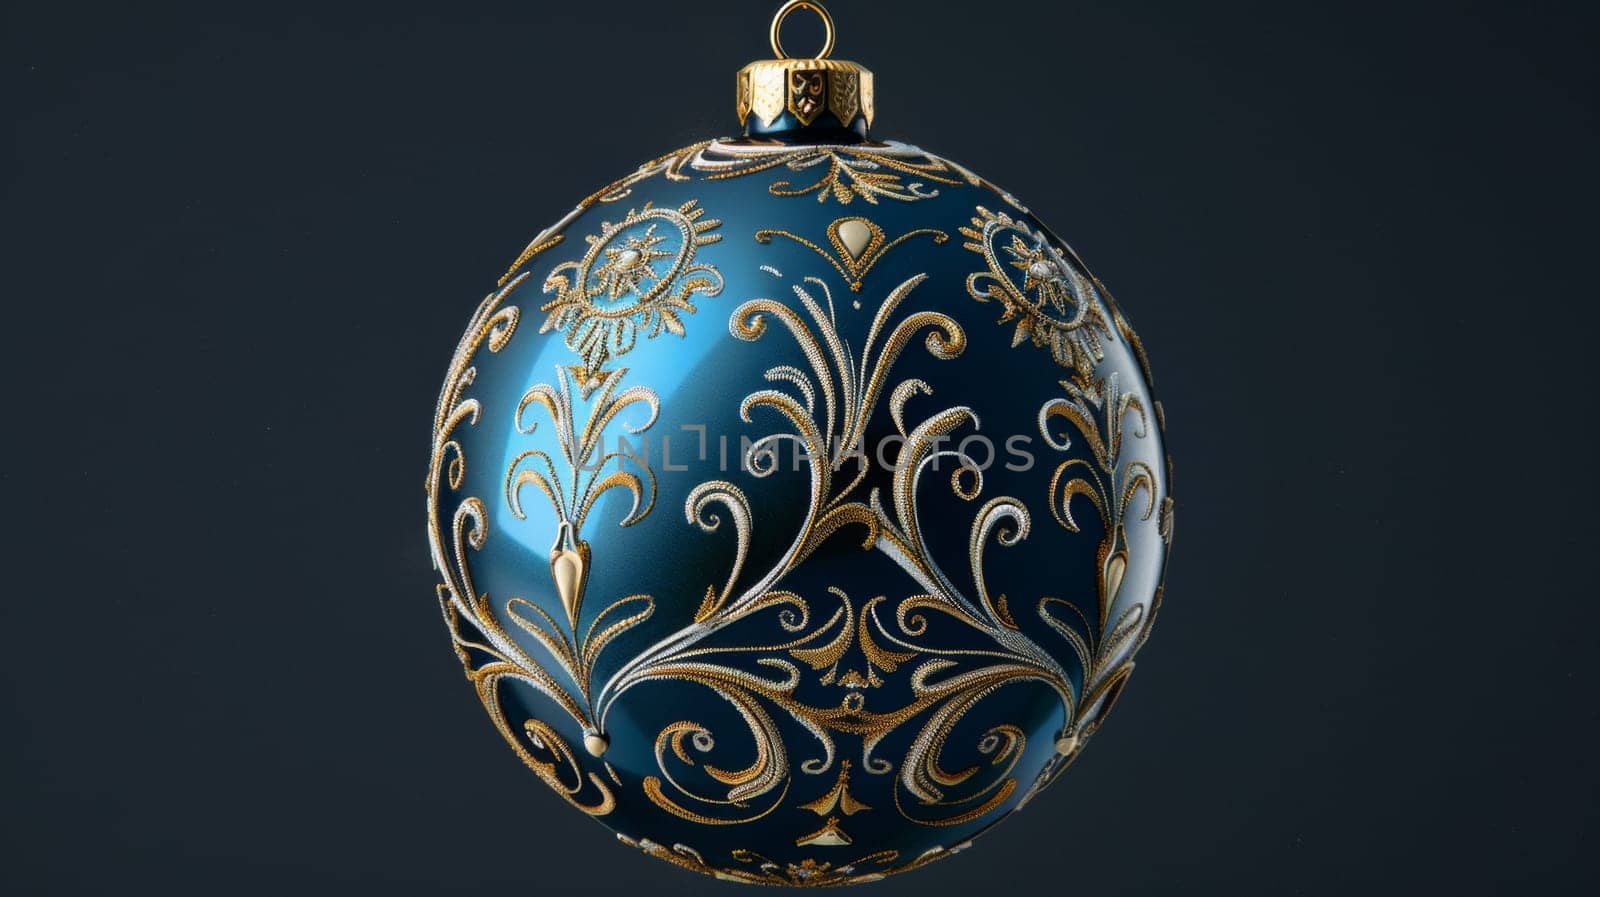 A blue ornament with gold design hanging from a black background